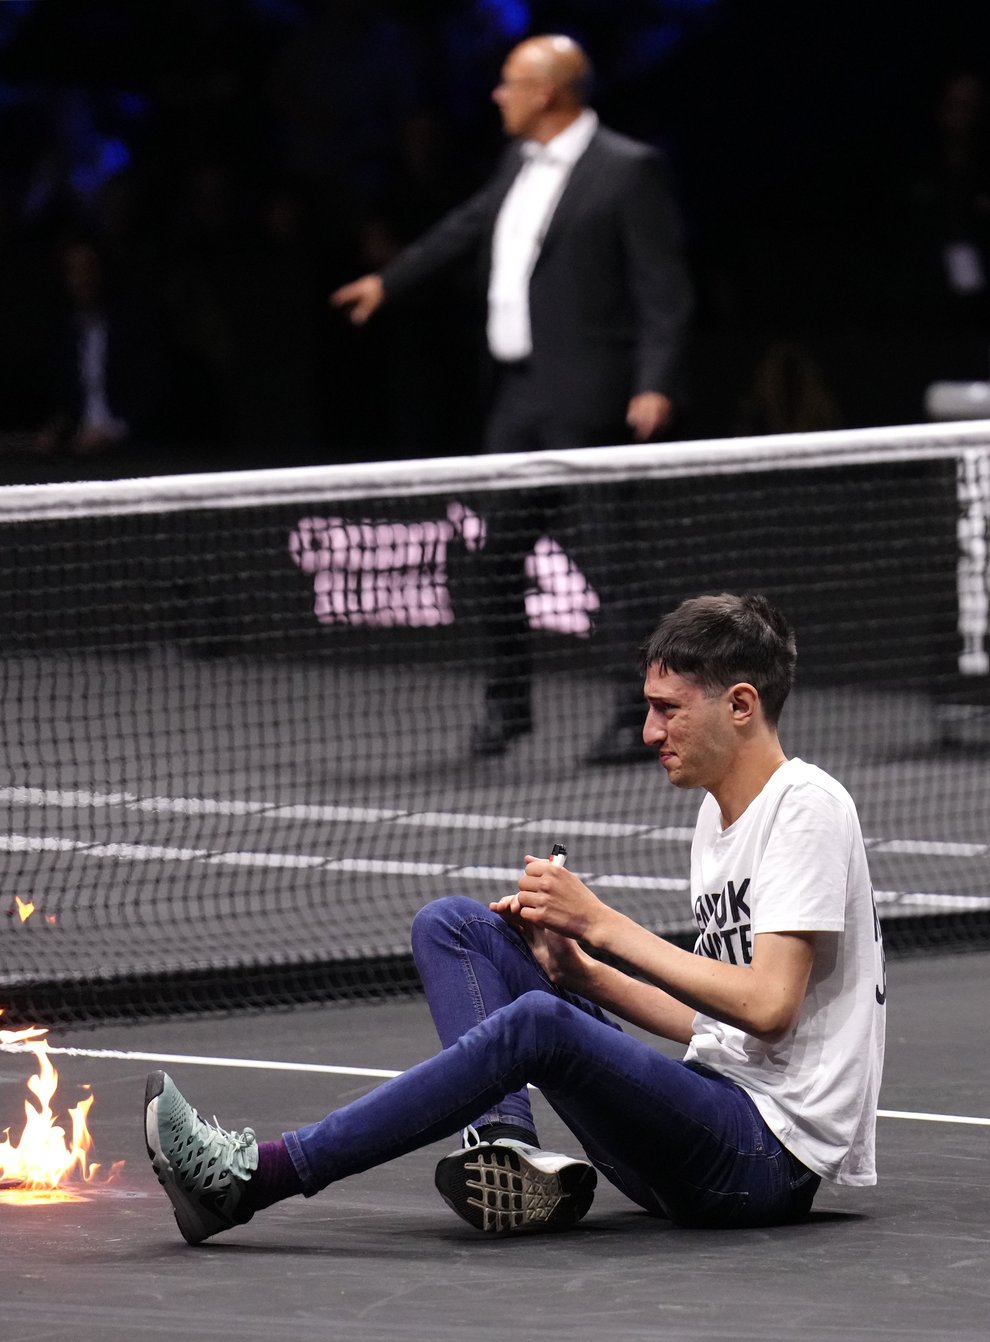 A protester lights a fire on the court at the Laver Cup (John Walton/PA)